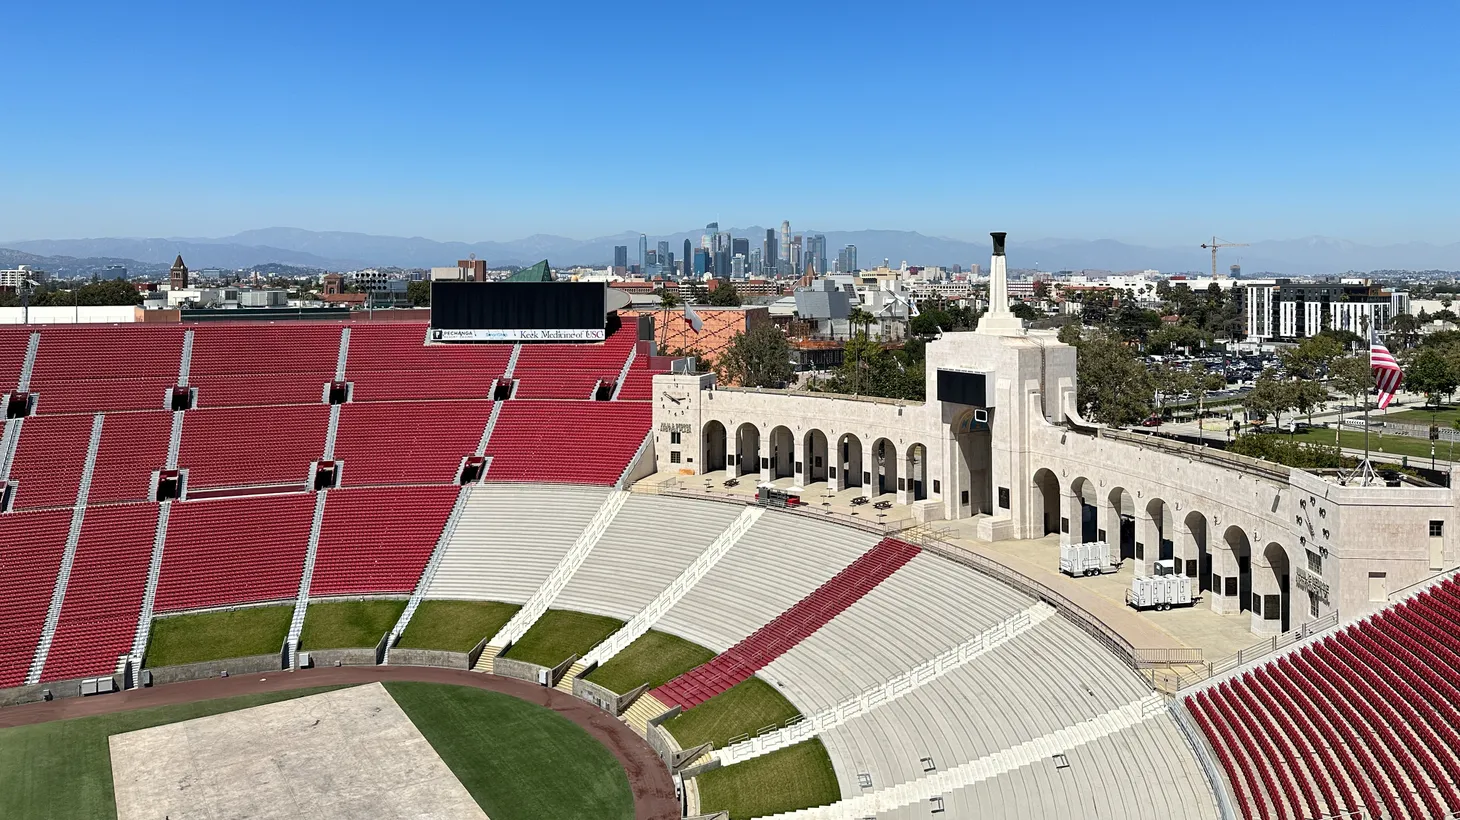 From inside the Coliseum, people can see downtown Los Angeles in the background.